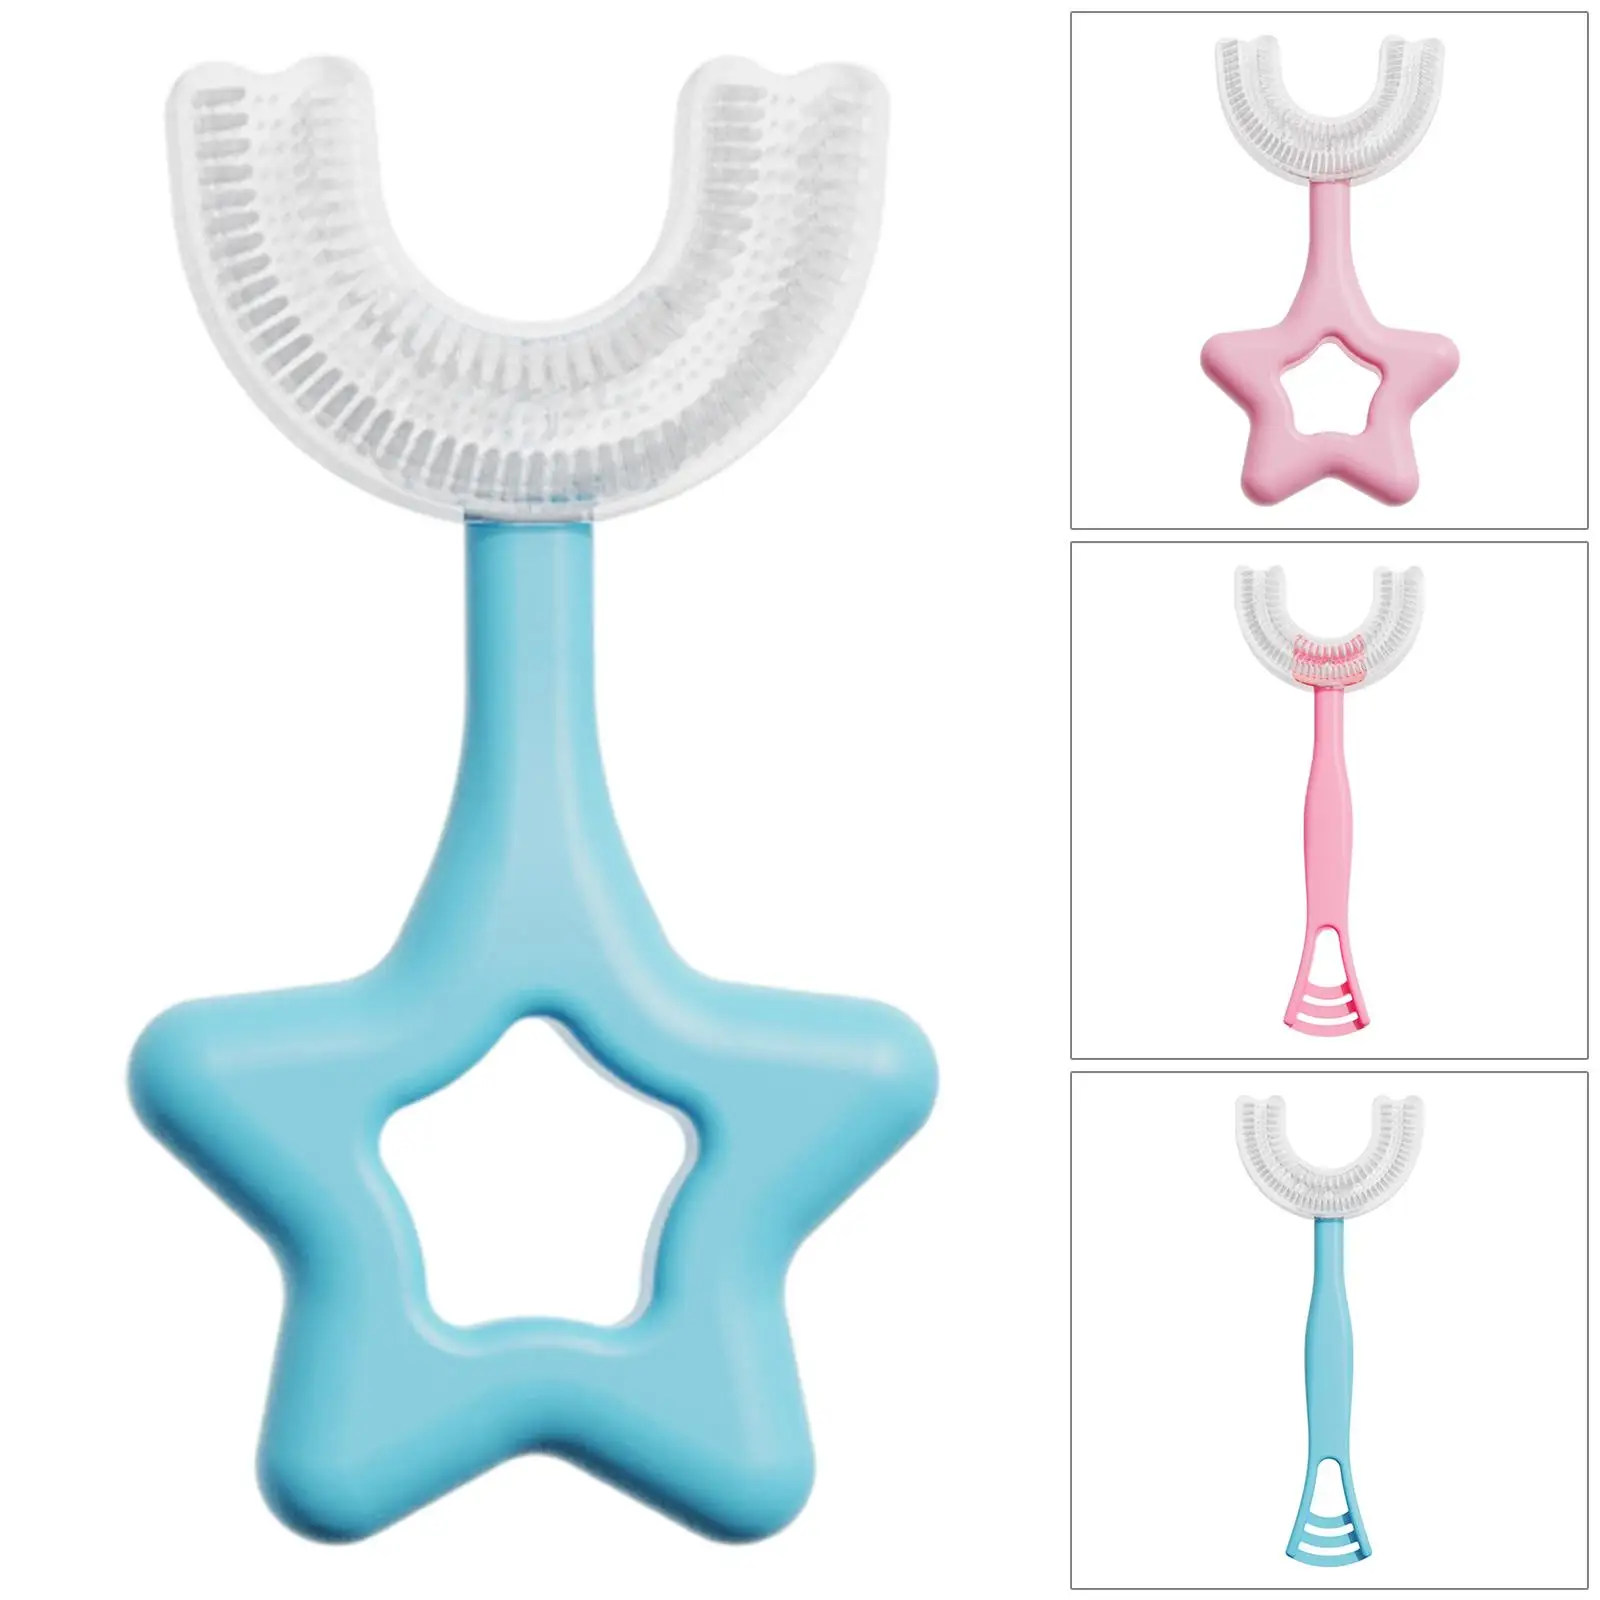 U-Shaped Silicone Toothbrush for Kids Teeth Cleaning Tools Cleaning Whole Mouth Durable Special Design Creative Cute Portable